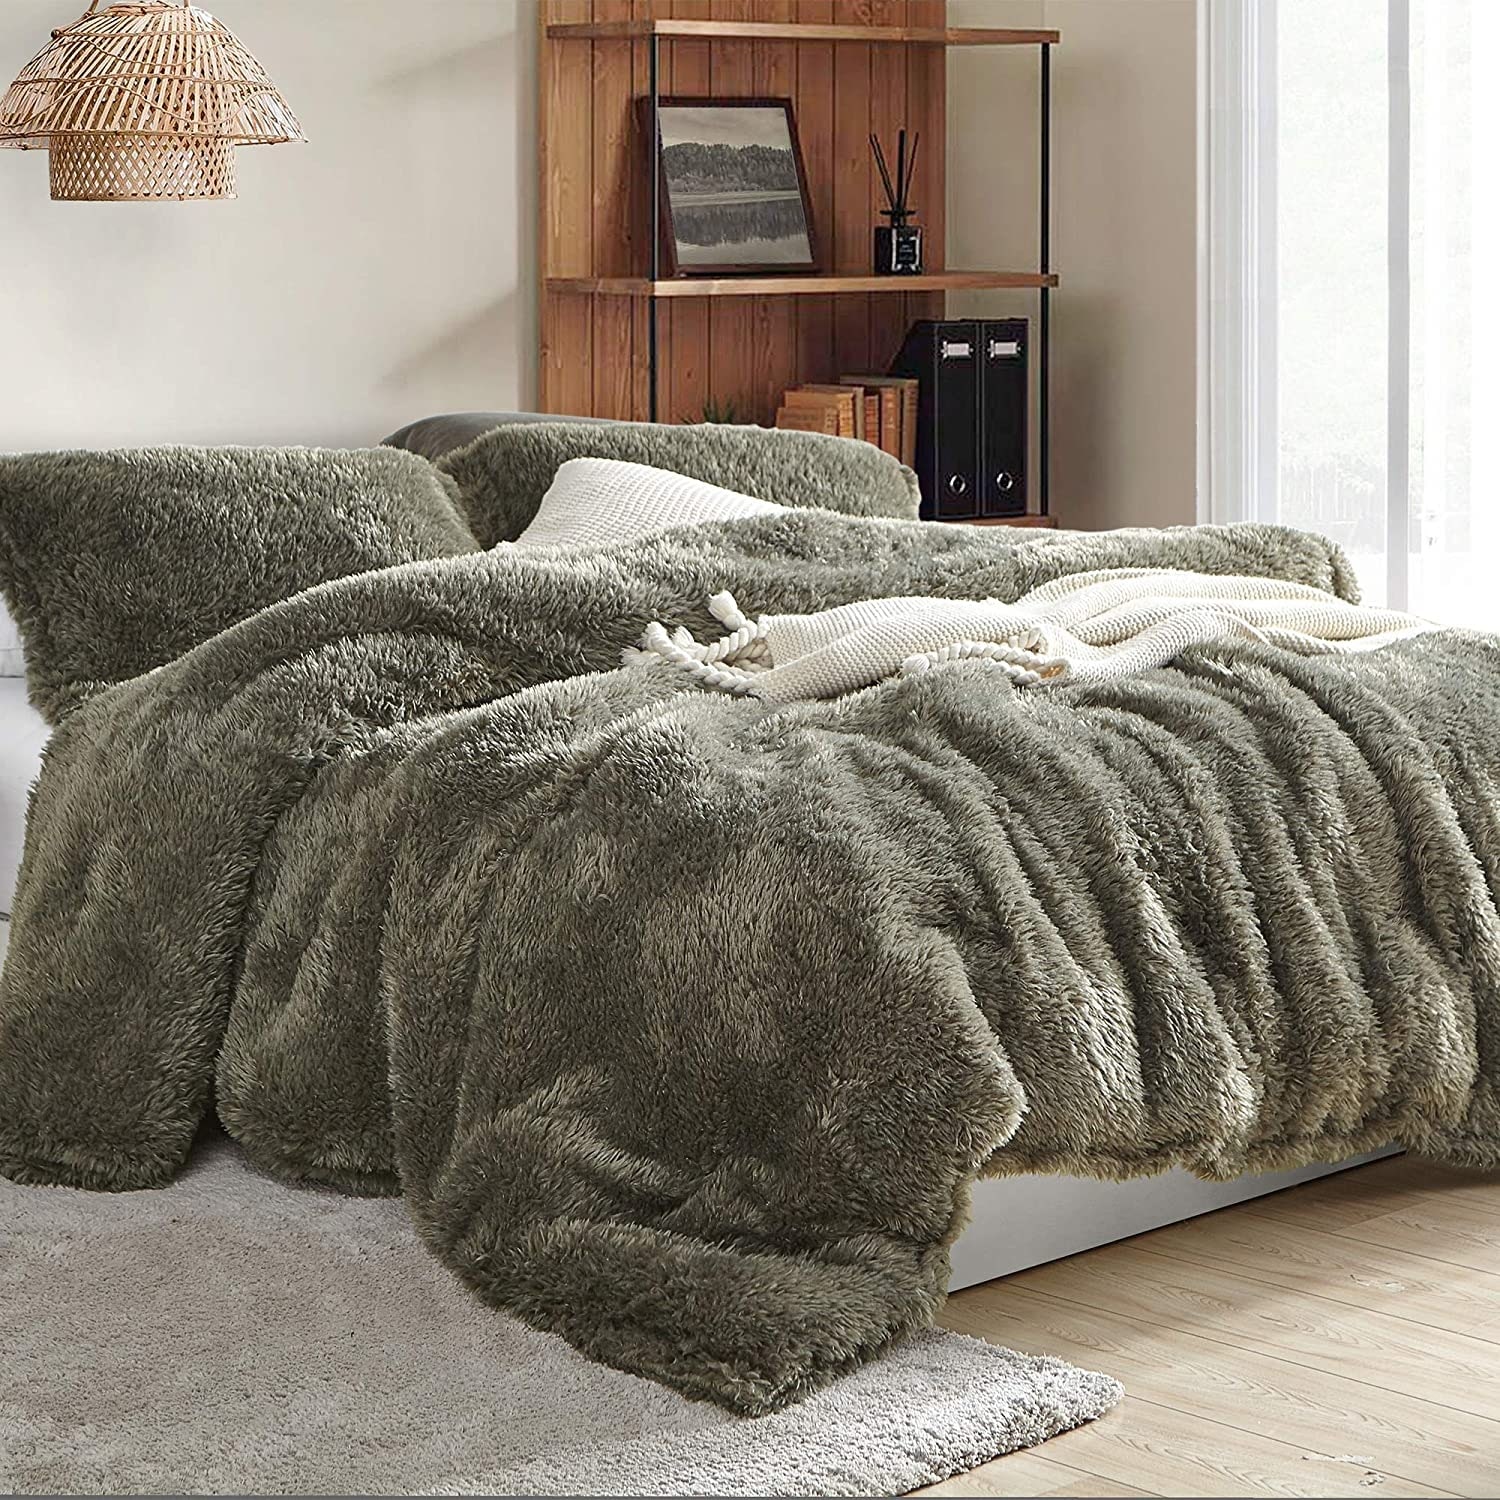 Coma Inducer® Comforter - Charcoal - Oversized Bedding